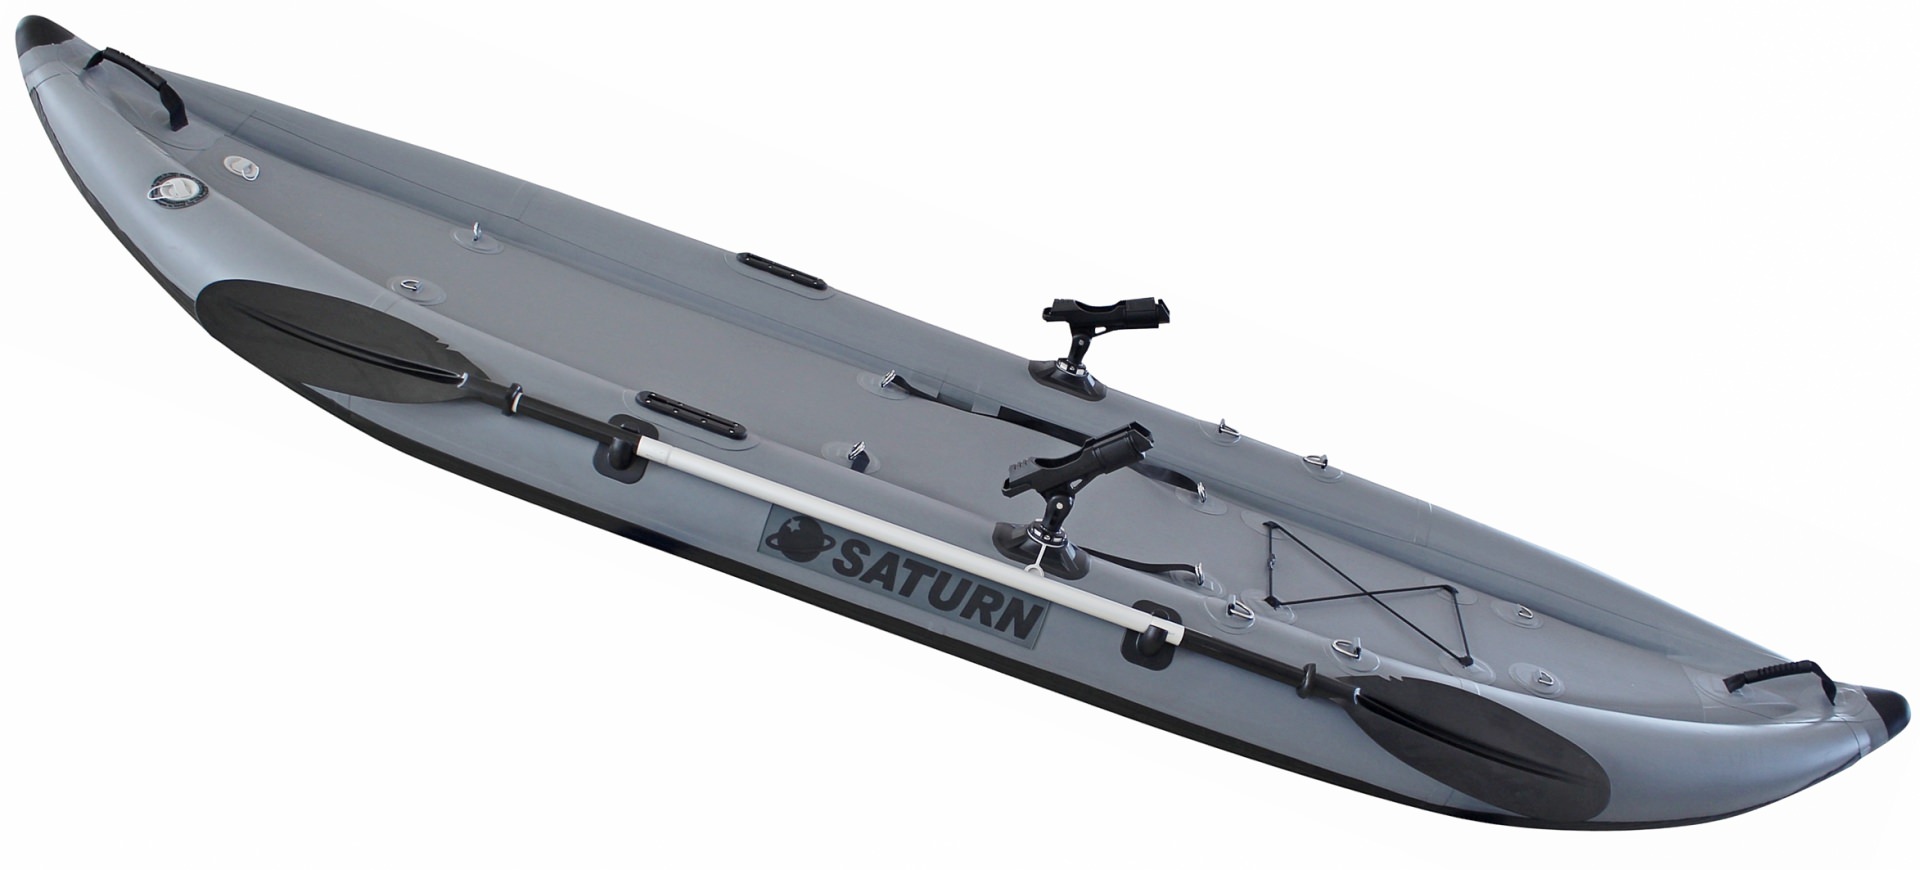 12' Saturn Extra Heavy-Duty Inflatable Fishing Kayak. Double